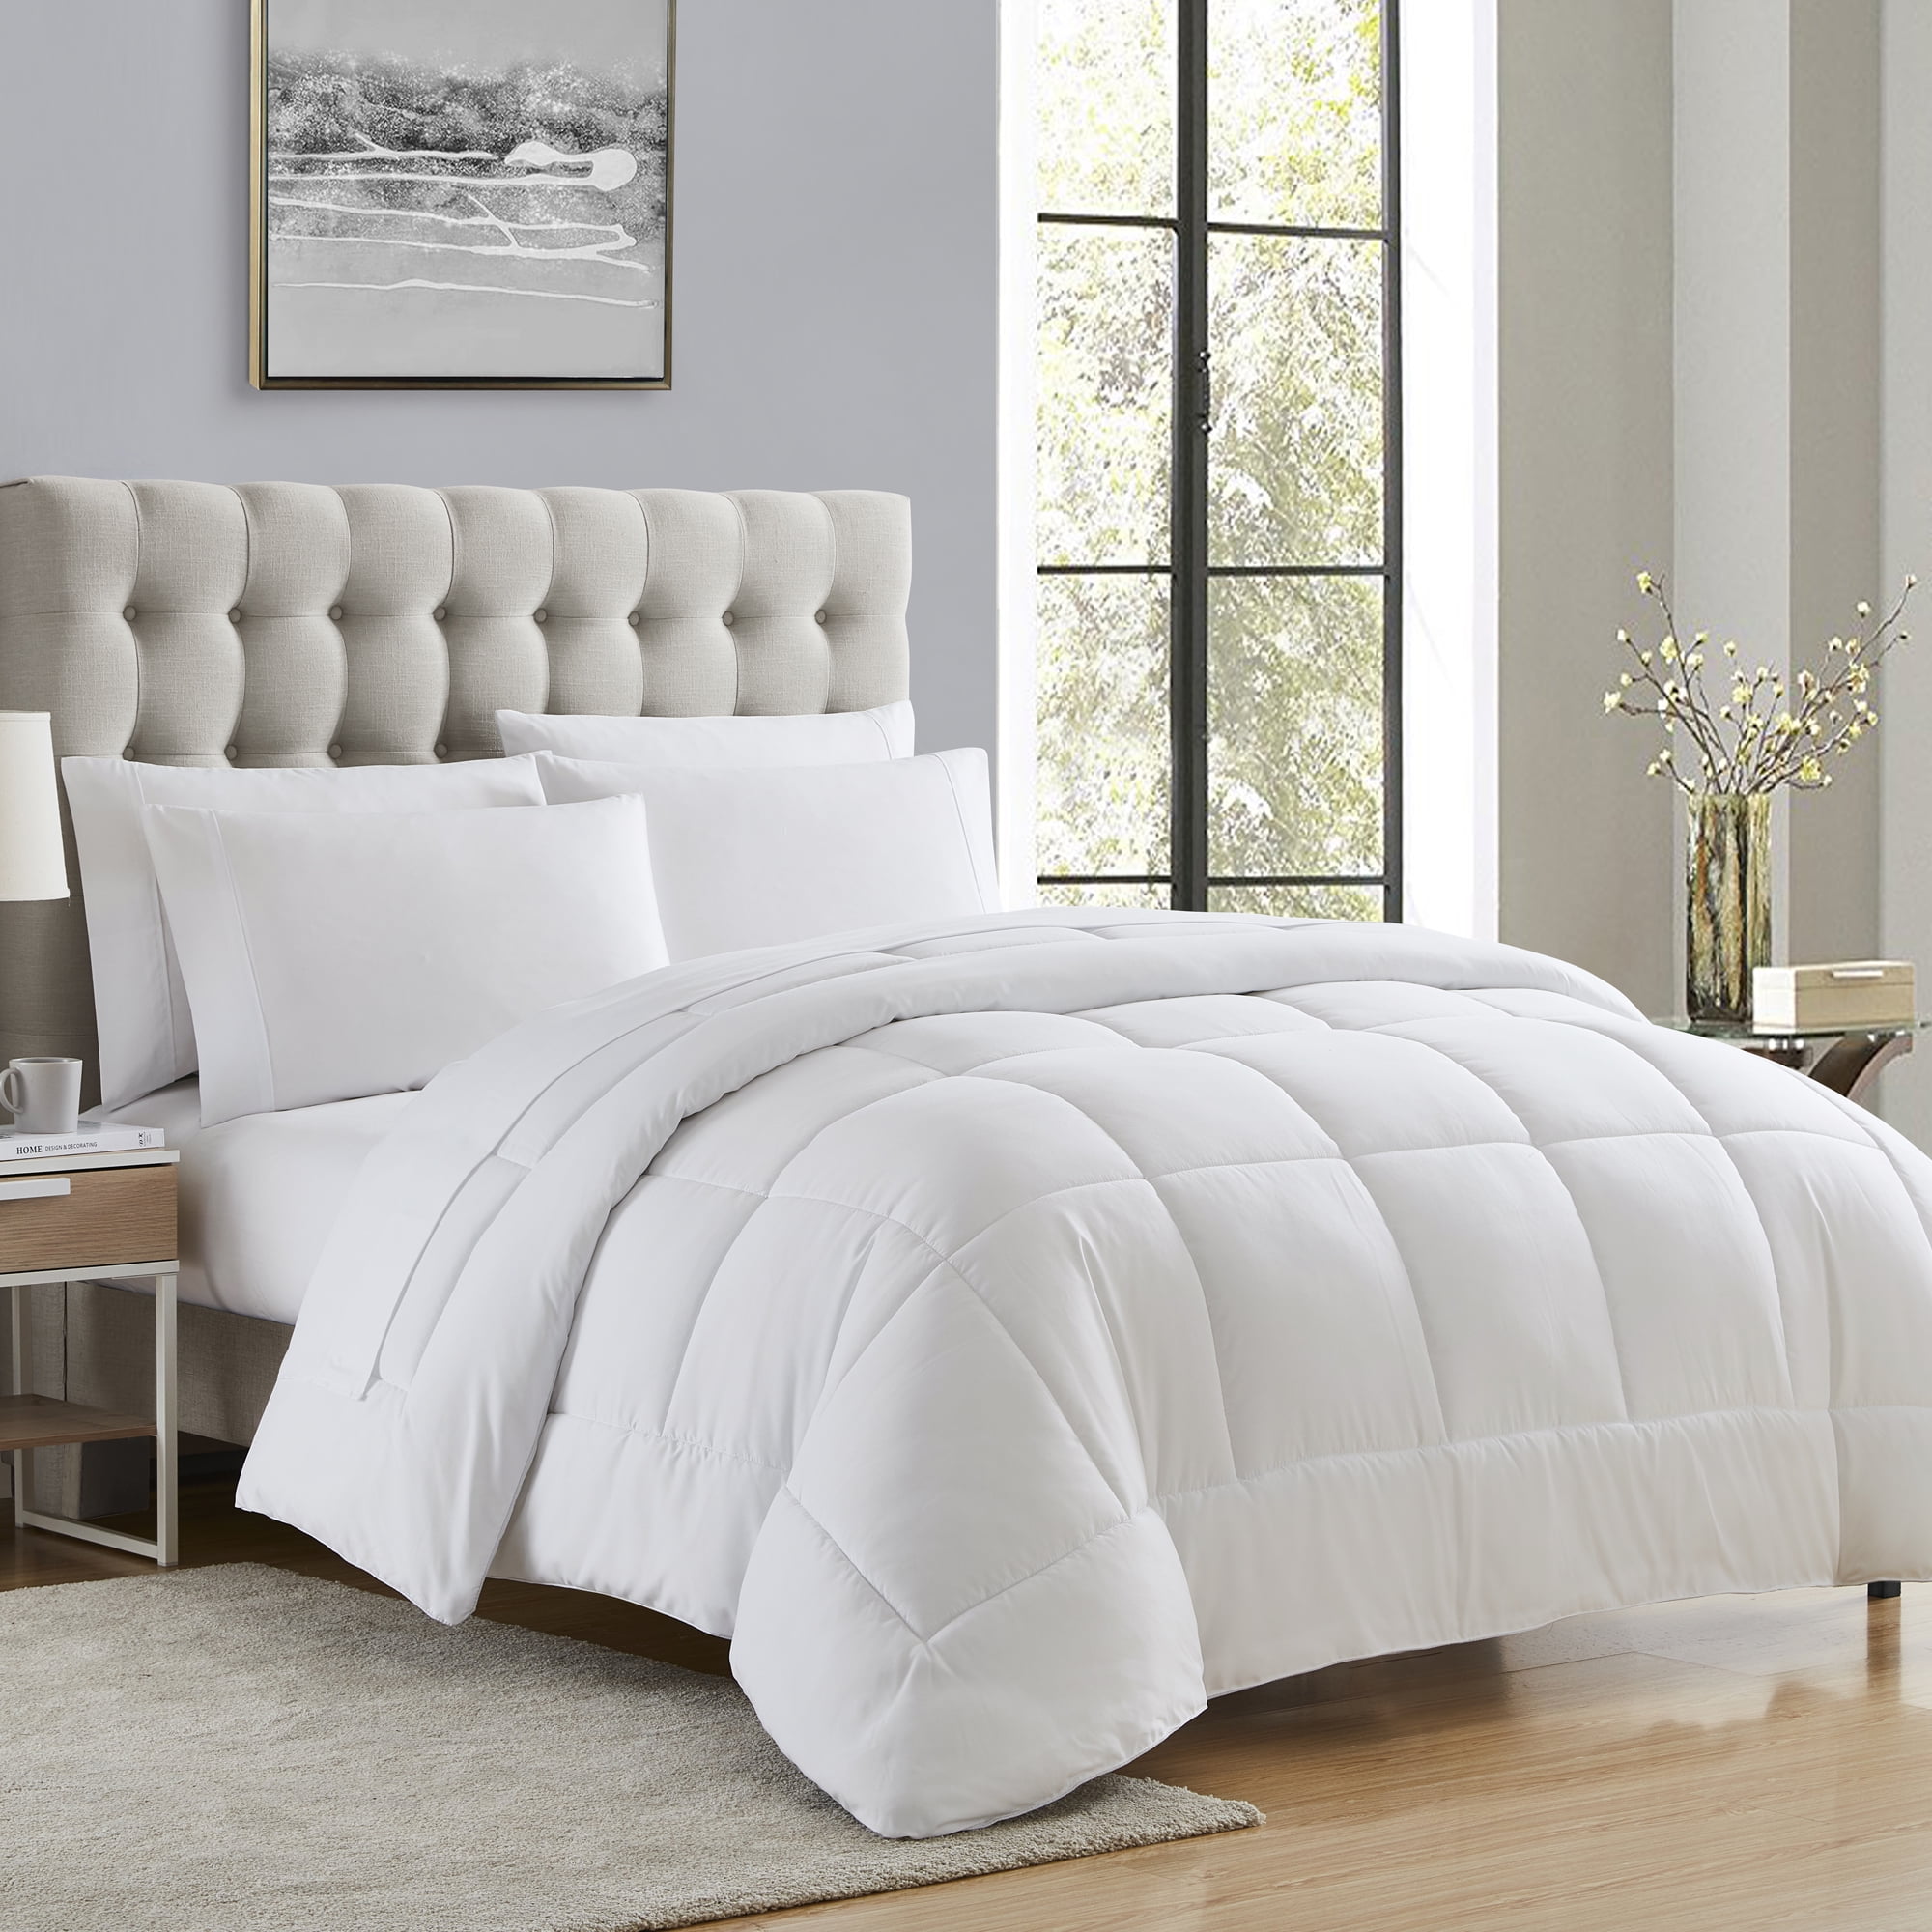 Details about   Bed In A Bag 8 Piece Down Alt Reversible Comforter Bedding Twin Queen King Gift 